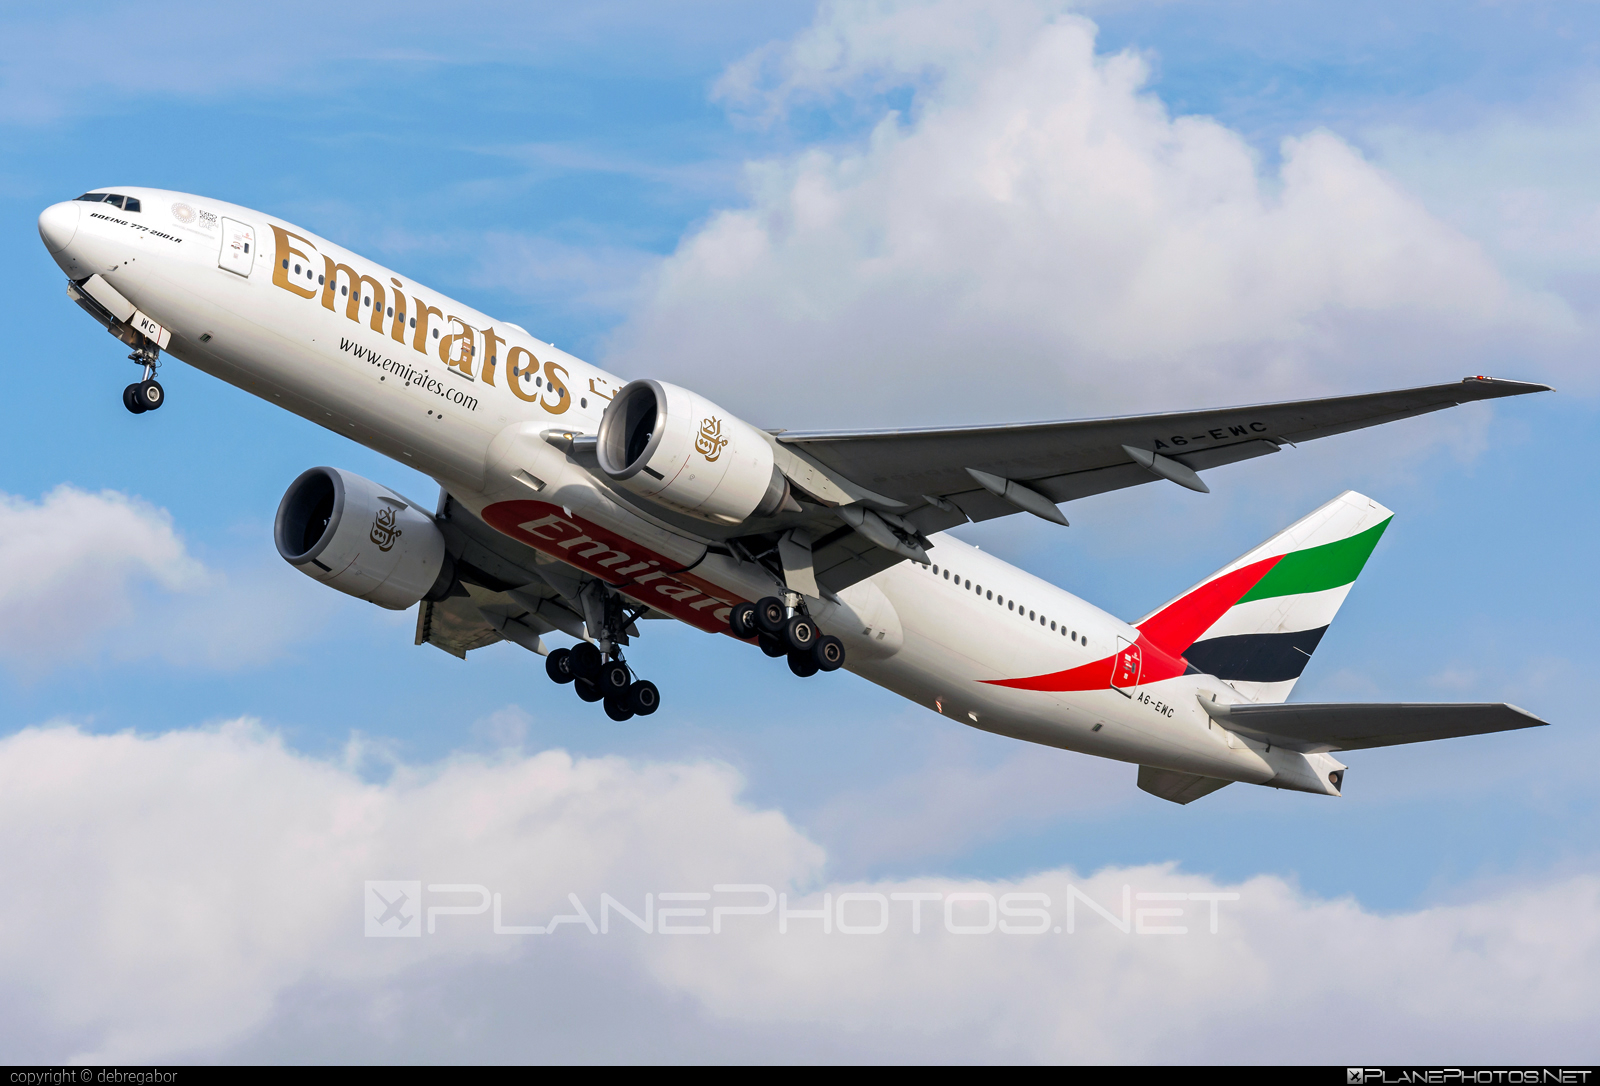 Boeing 777-200LR - A6-EWC operated by Emirates #b777 #b777lr #boeing #boeing777 #emirates #tripleseven